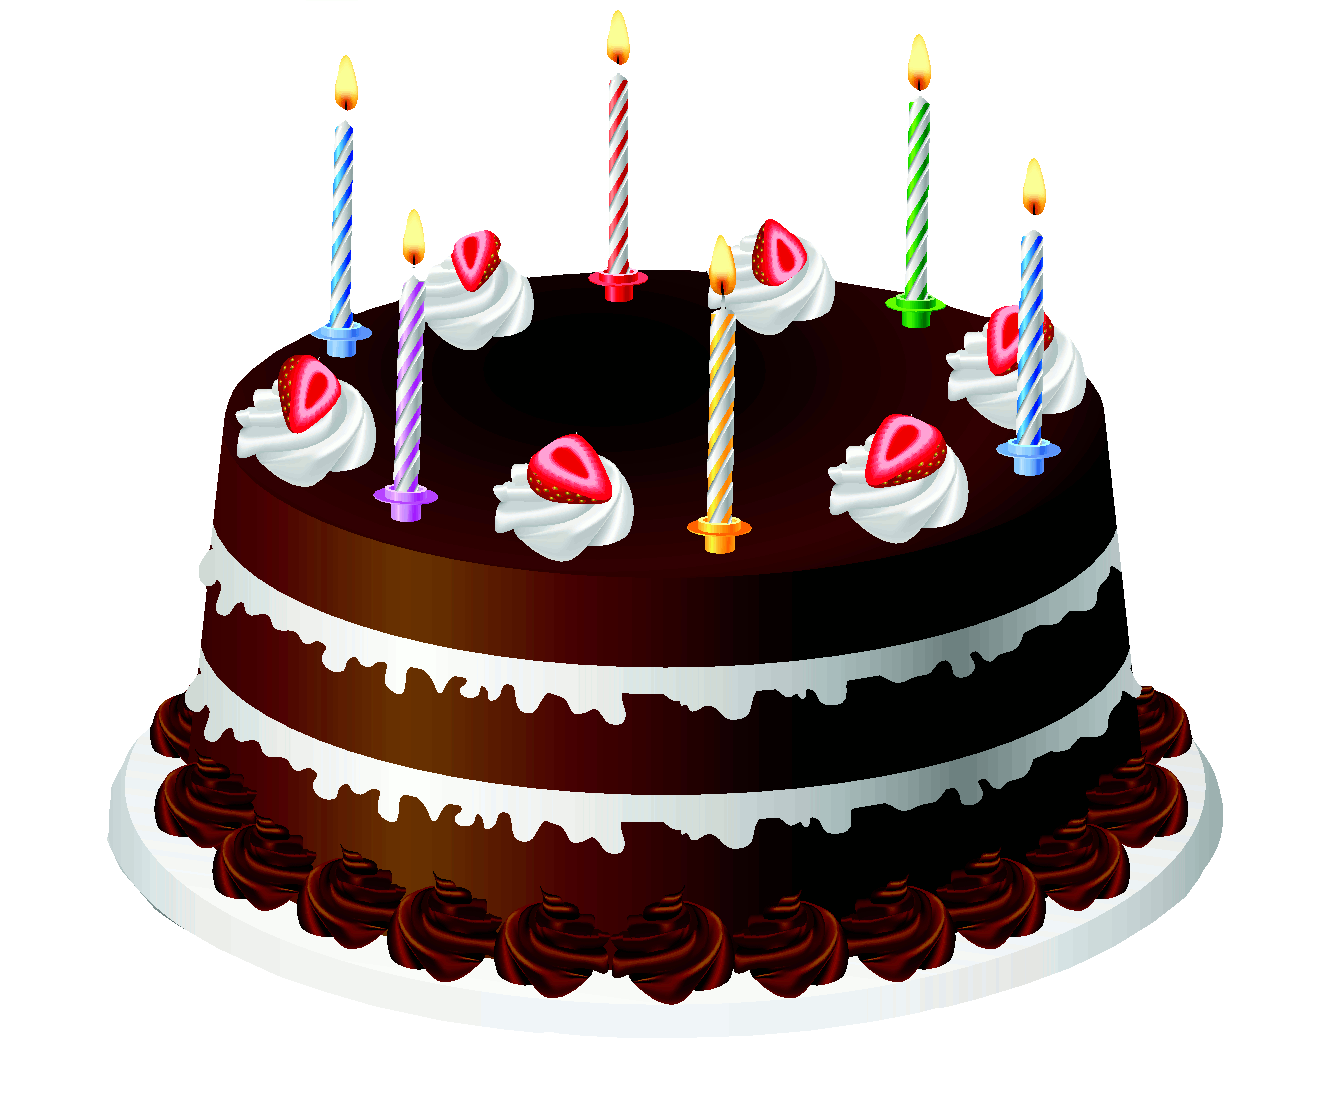 PNG HD Of A Birthday Cake - 128383